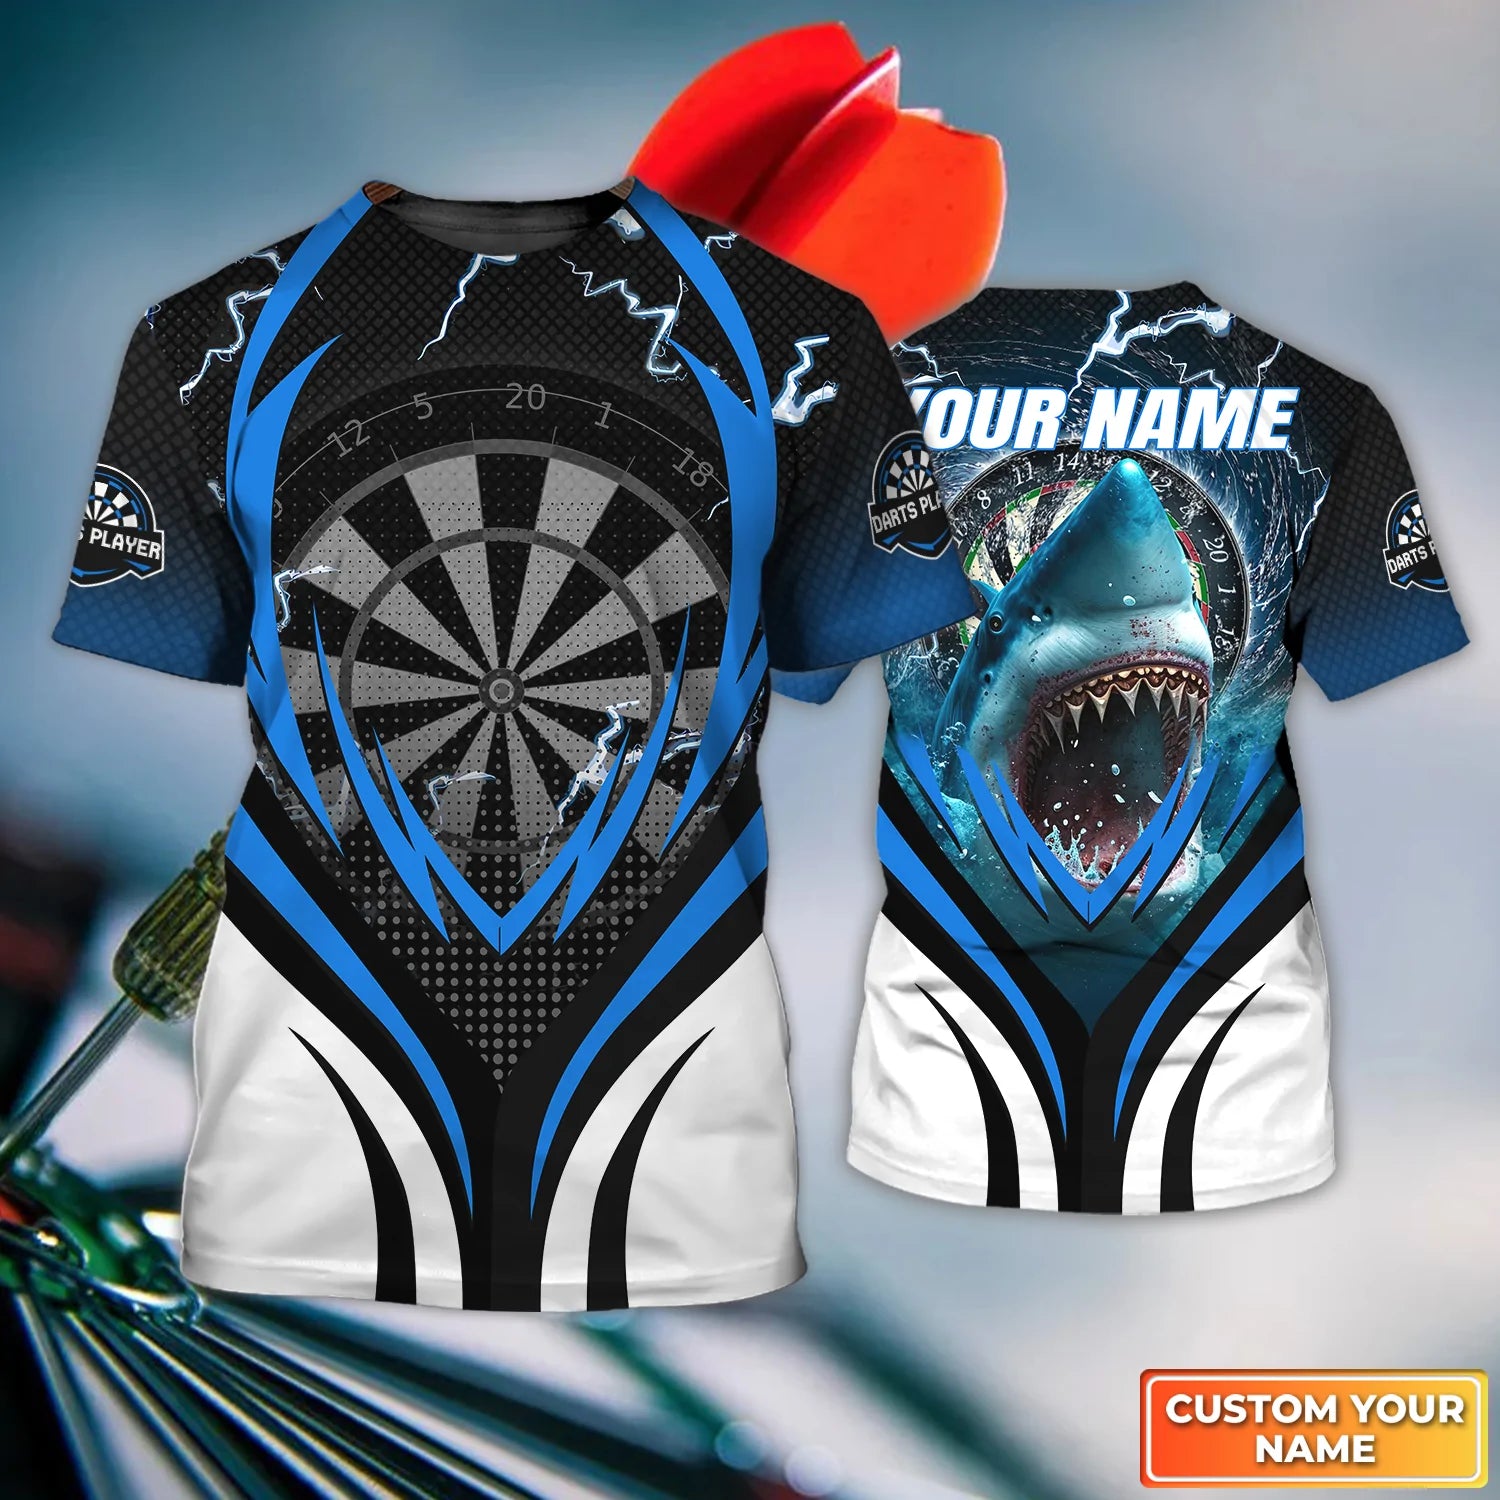 Bullseye Dartboard Personalized Name 3D Shark And Darts Tshirt For Dart Team Player – DT074